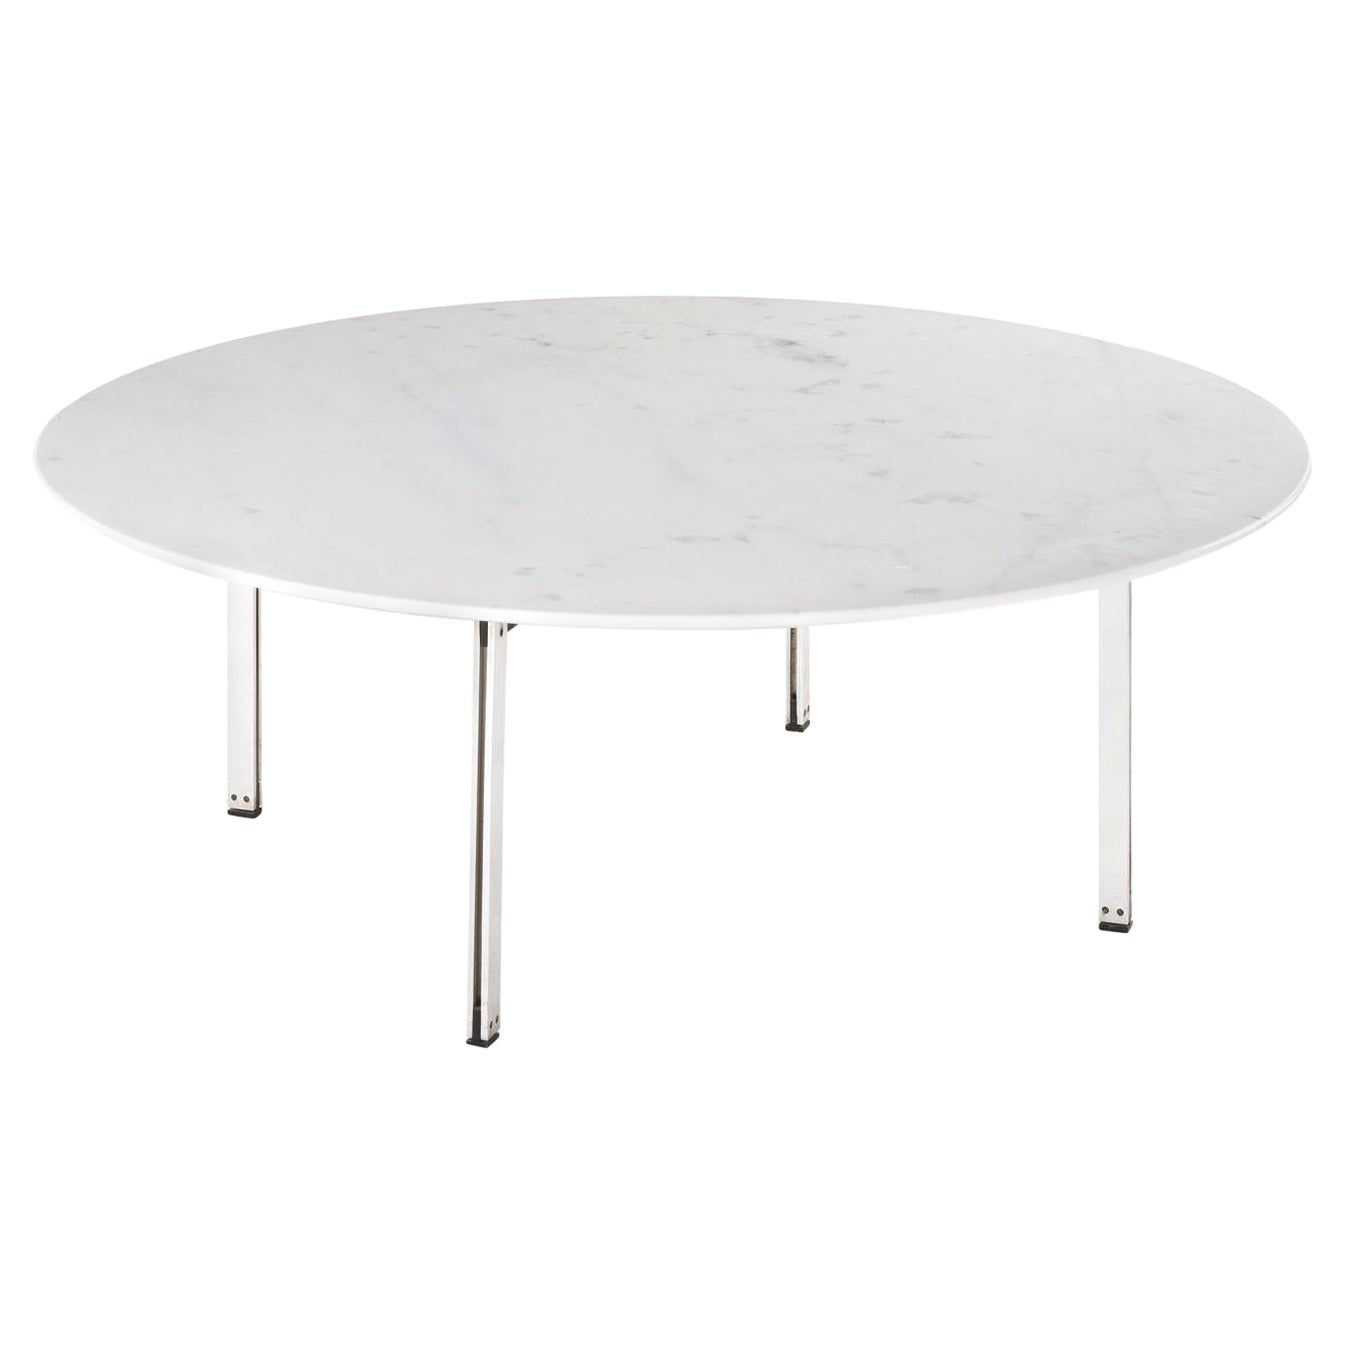 Florence Knoll Round Low Table in White Marble and Metal by Knoll 1950s Italy For Sale